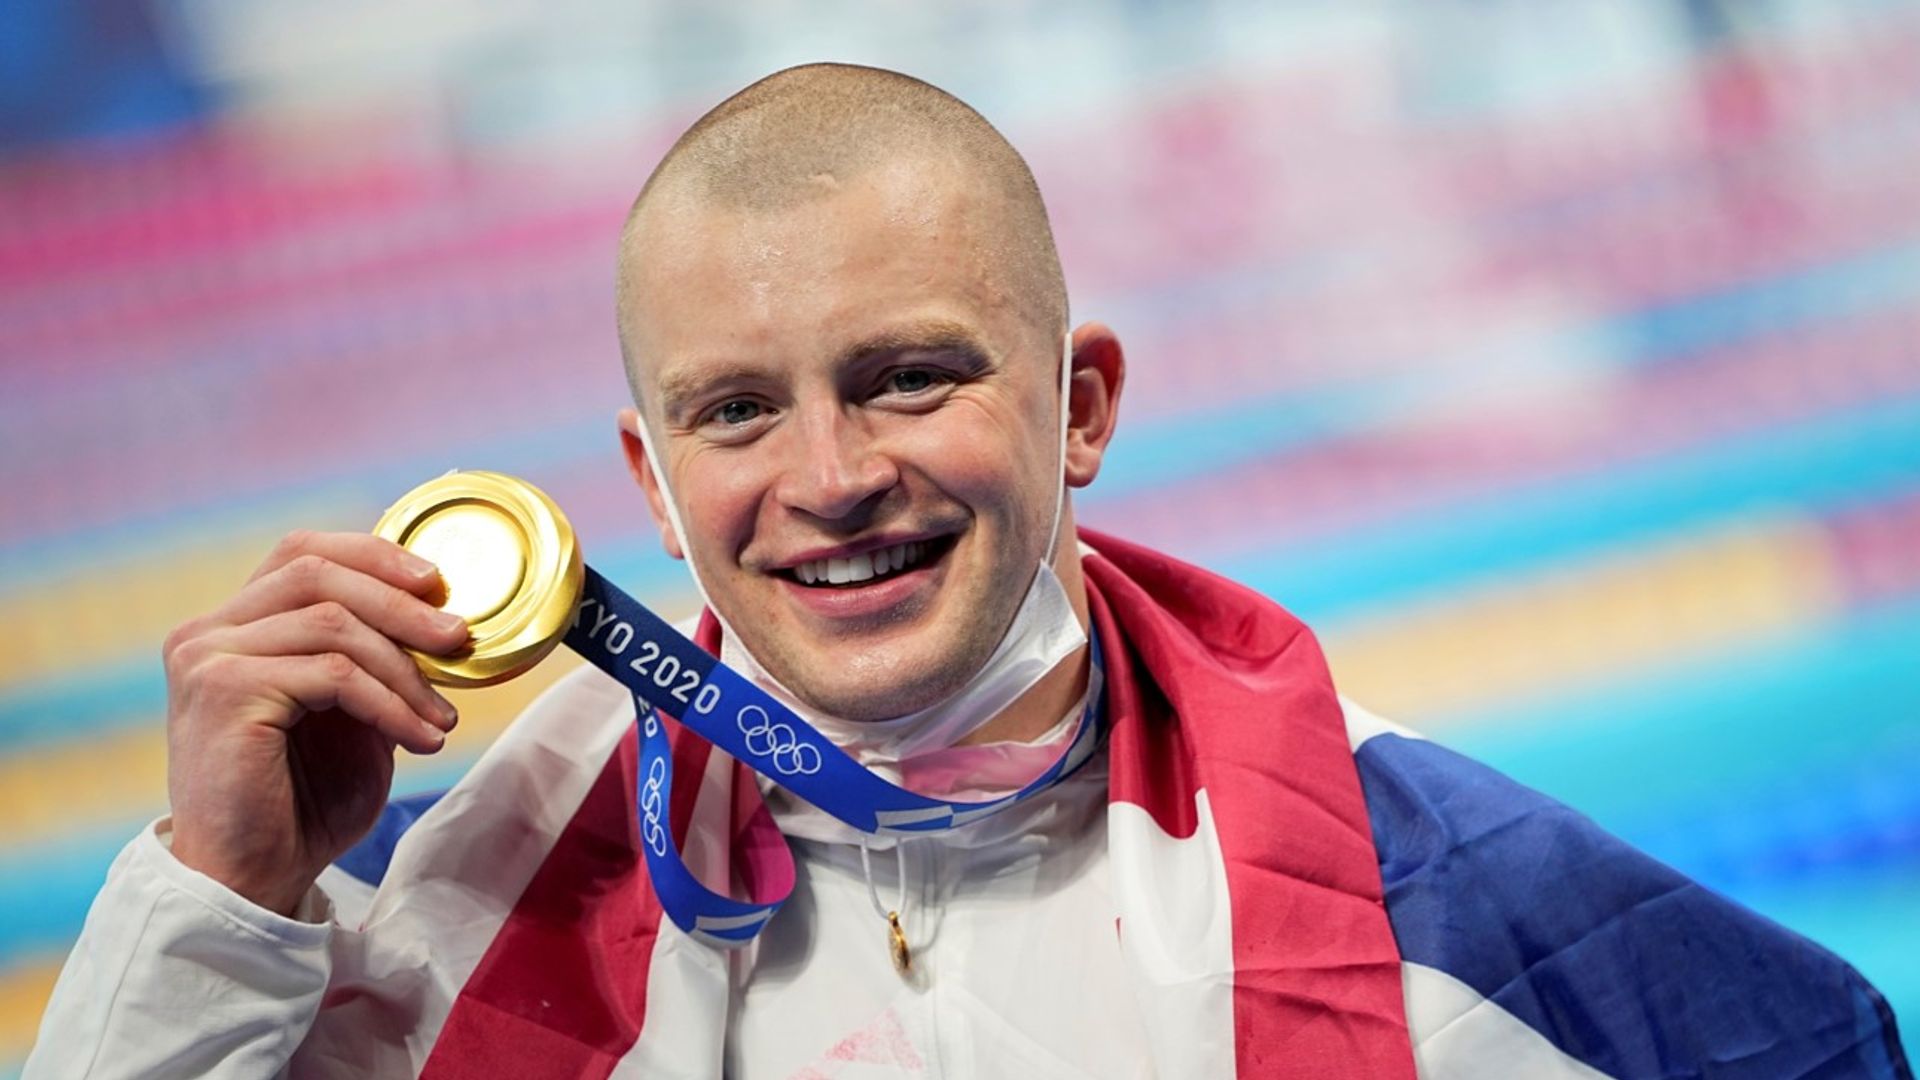 Peaty wins Team GB's first gold and defends Olympic title